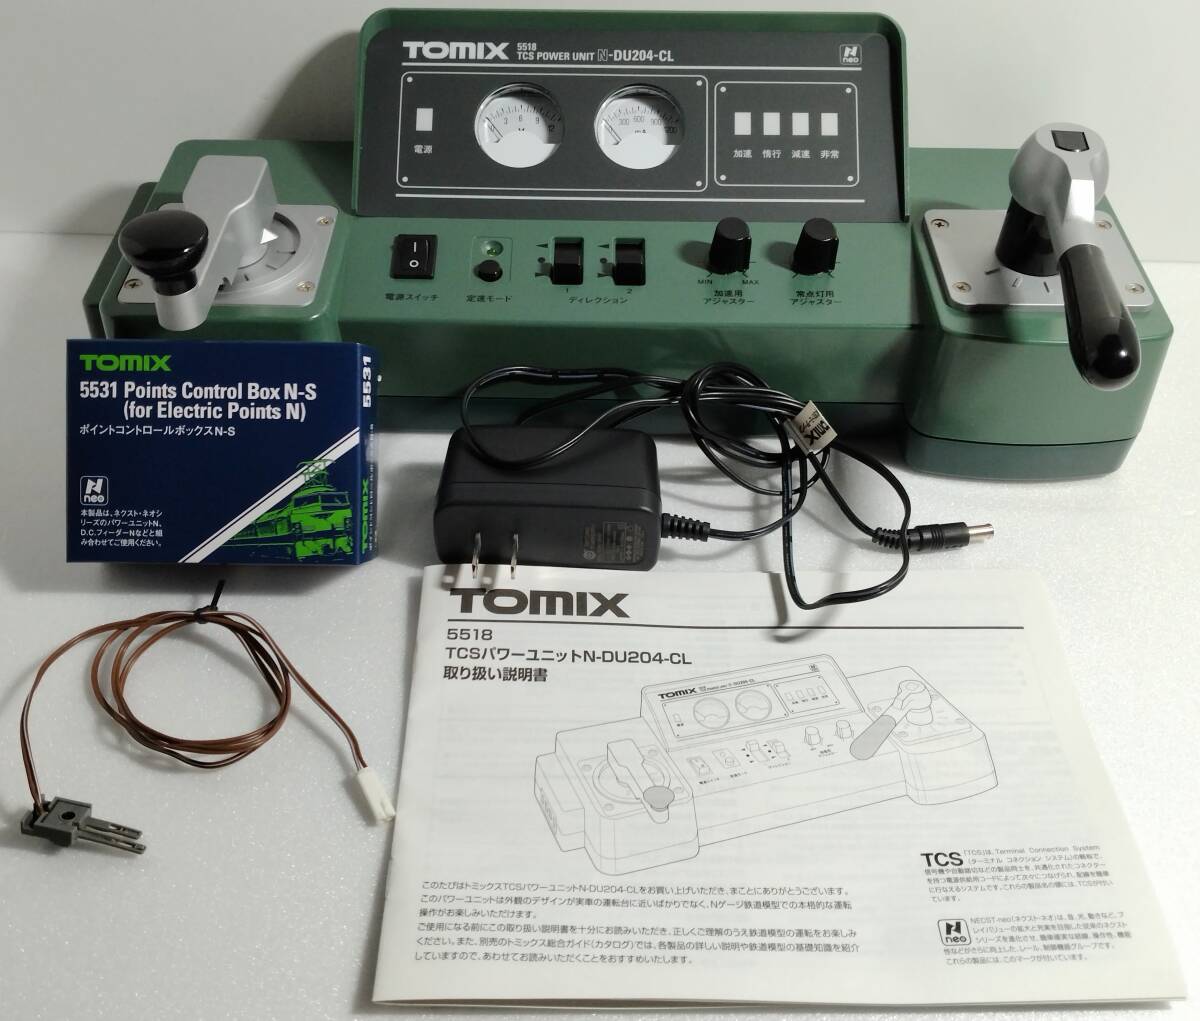 [ N gauge ]TOMIX /to Mix 5518 TCS power unit N-DU204-CL : 5531 Point control box N-S * D.C. feeder N attaching 